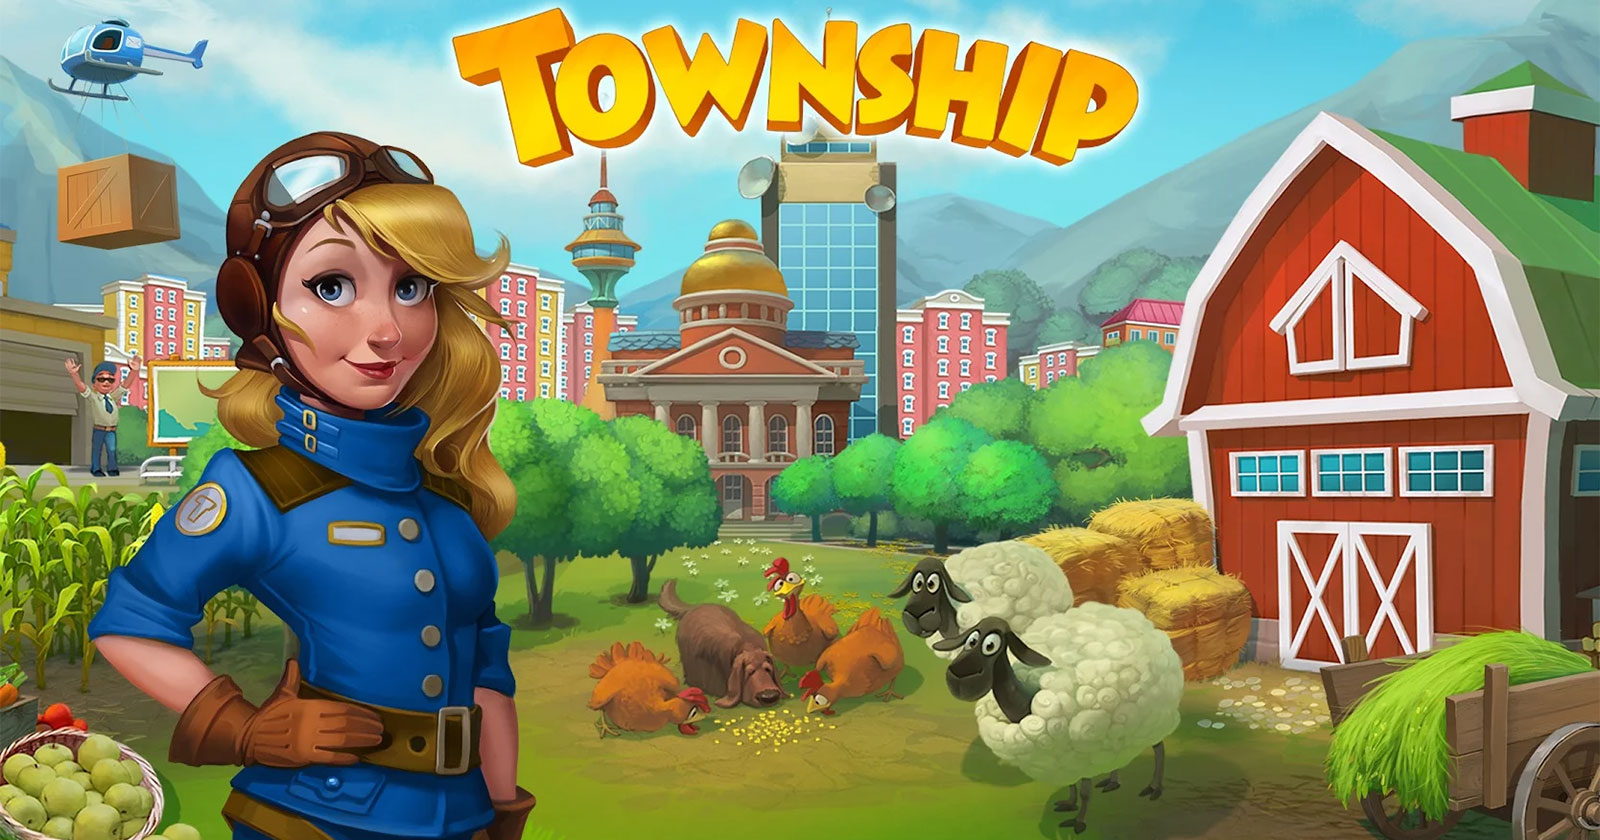 Download The Latest Version of Township Mod Apk with Anti-Ban, Cash for IOS